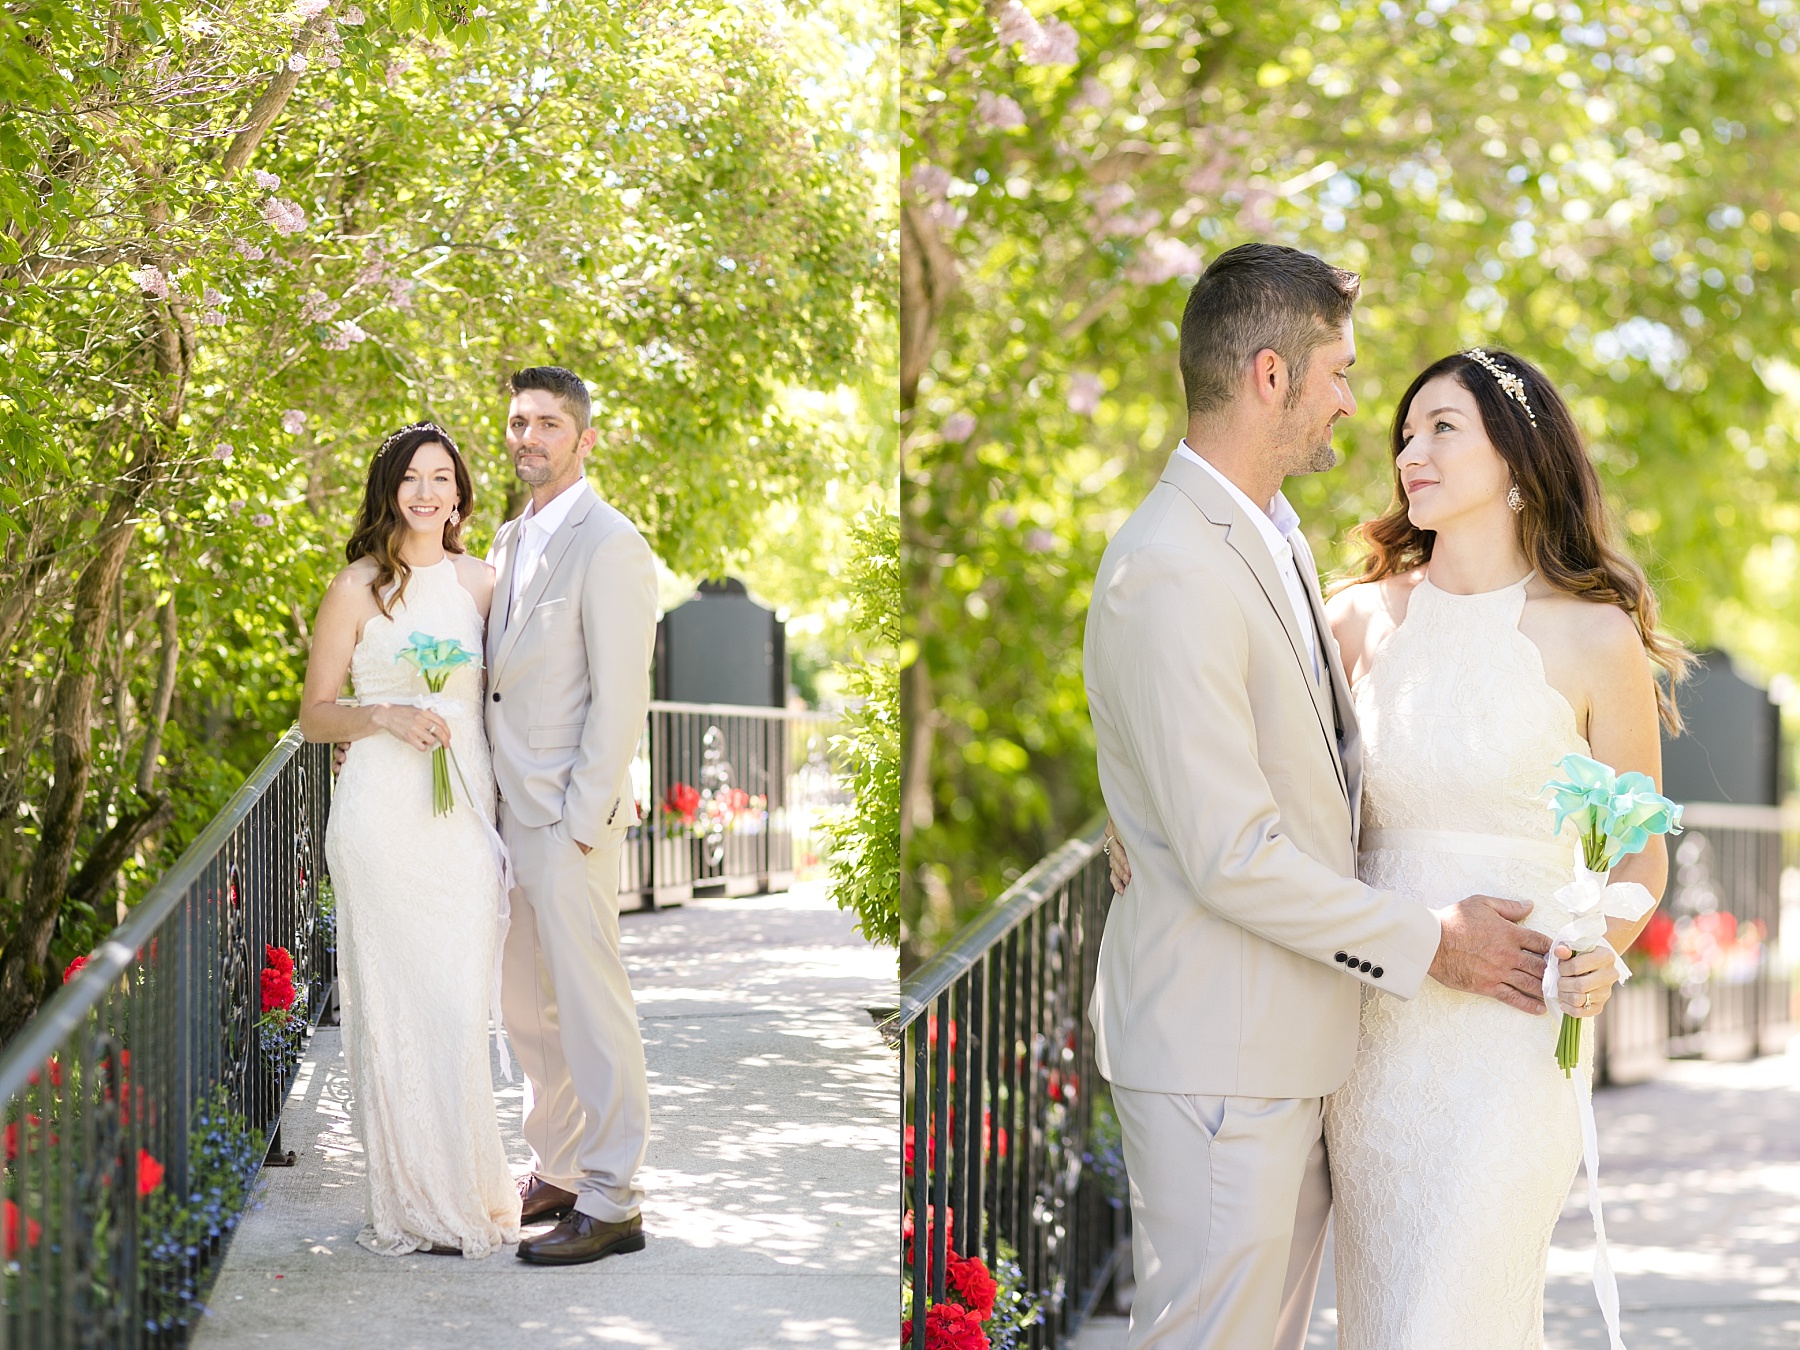 The Grand Hotel, boardwalk and beach were the perfect setting for a Mackinac Island wedding.